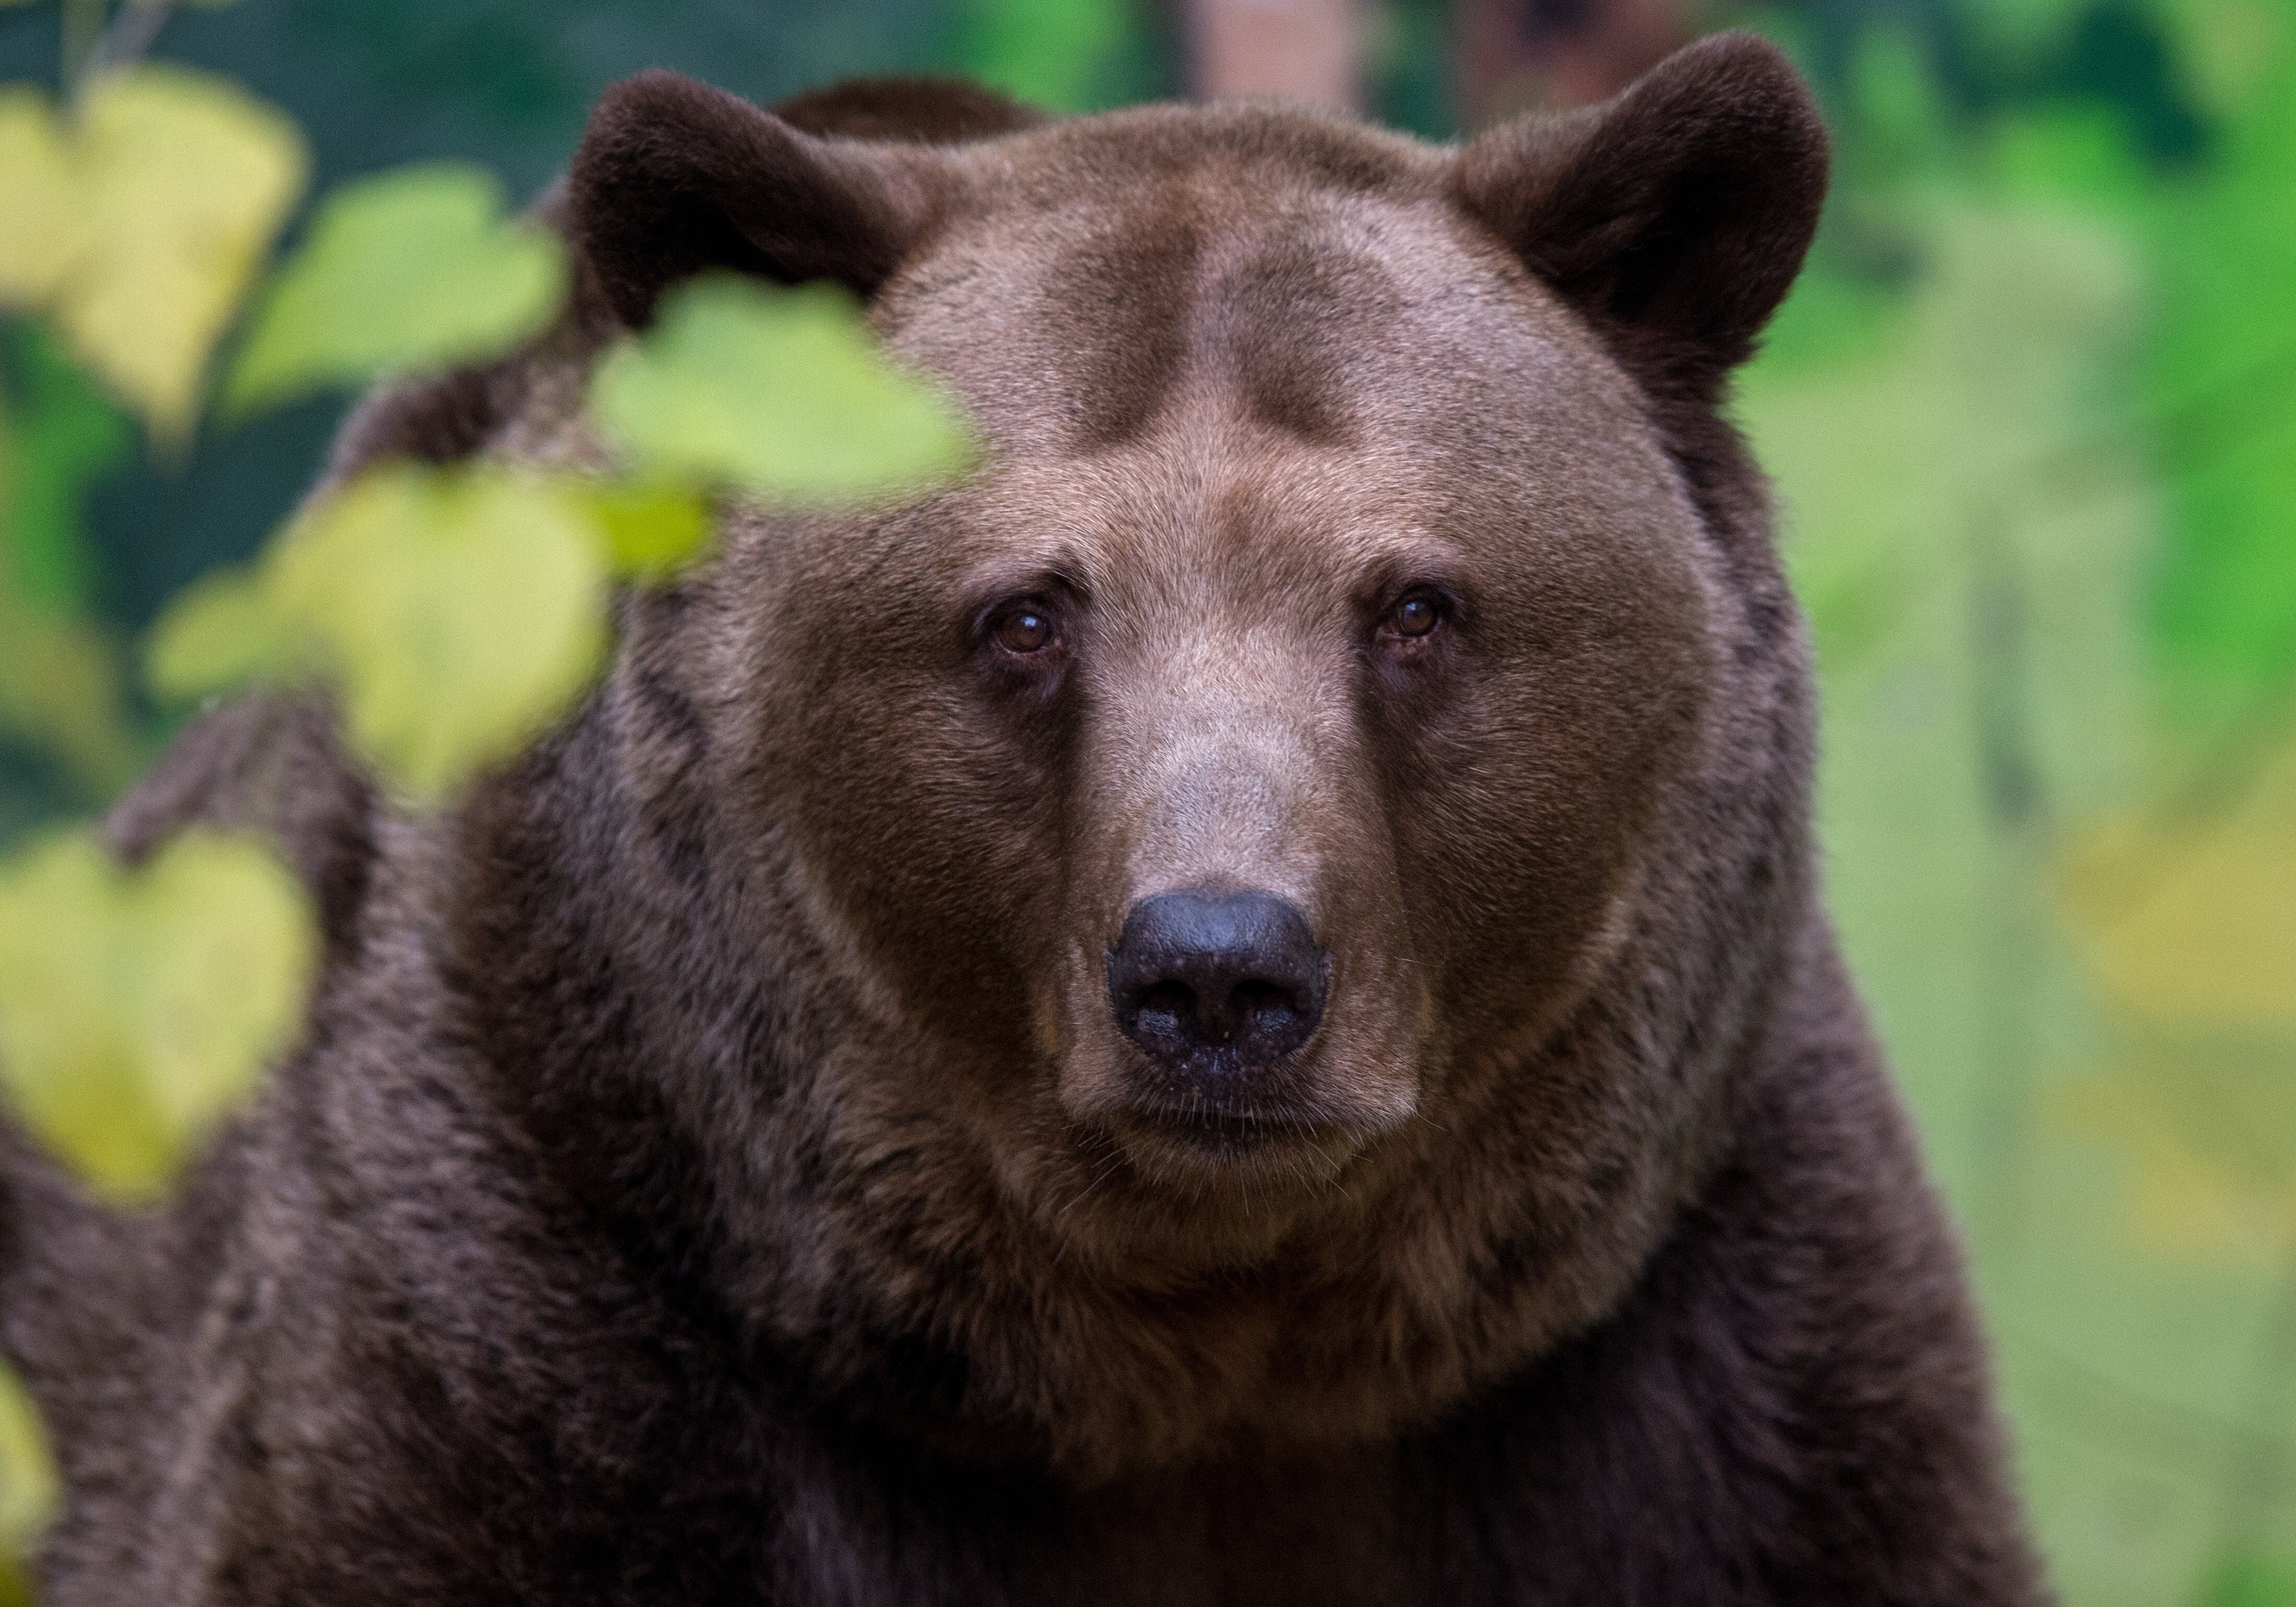 Slovakia’s brown bear population has grown since environmental measures were introduced in the late 1980s